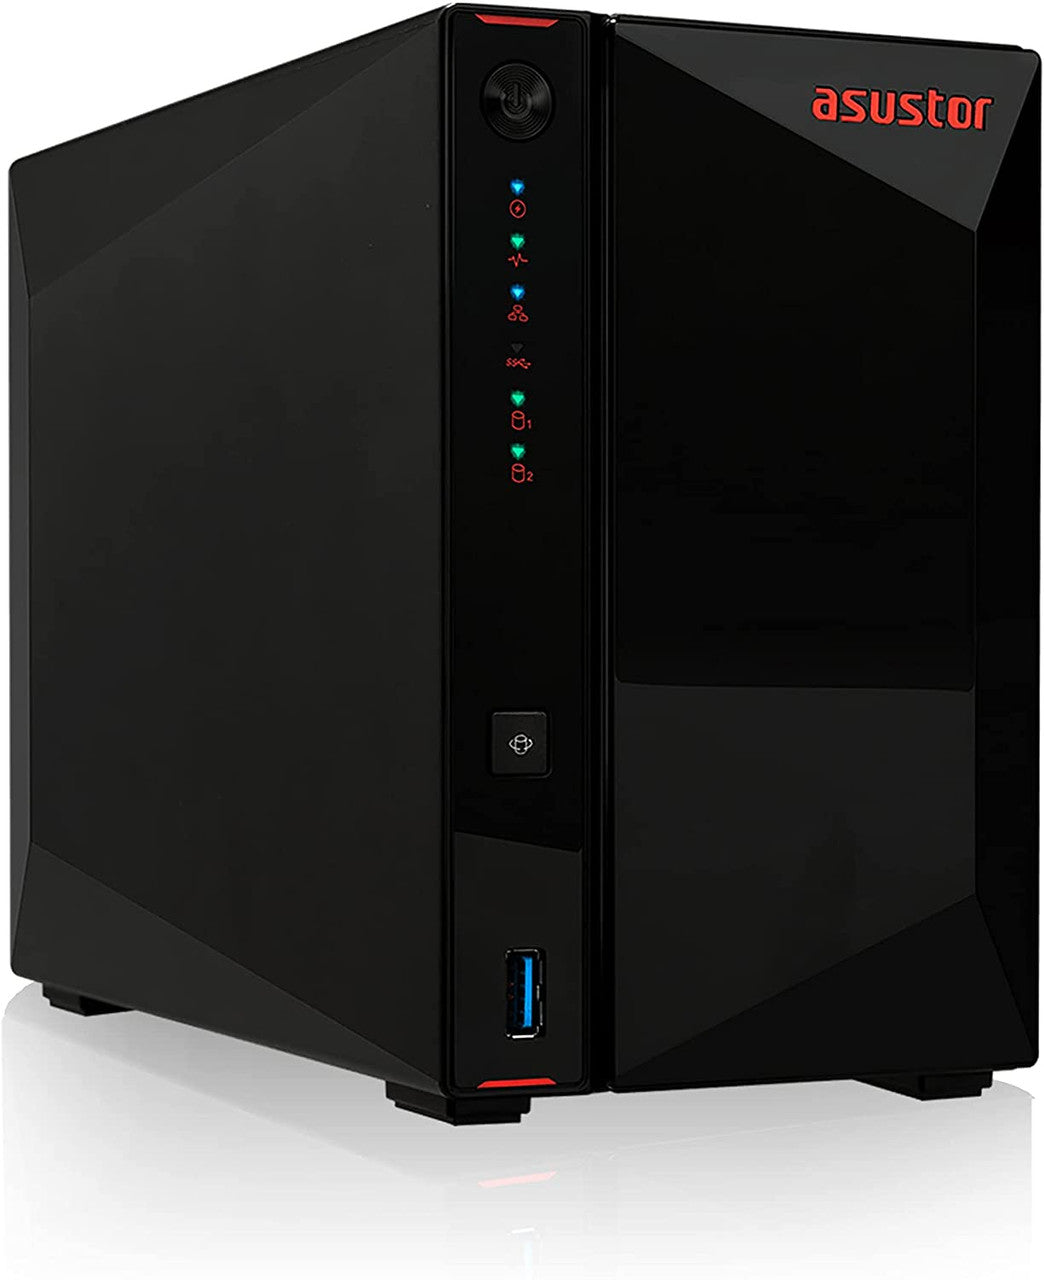 Asustor AS5202T 2-Bay Nimbustor 2 NAS with 2GB RAM and 24TB (2 x 12TB) Western Digital RED PRO Drives Fully Assembled and Tested